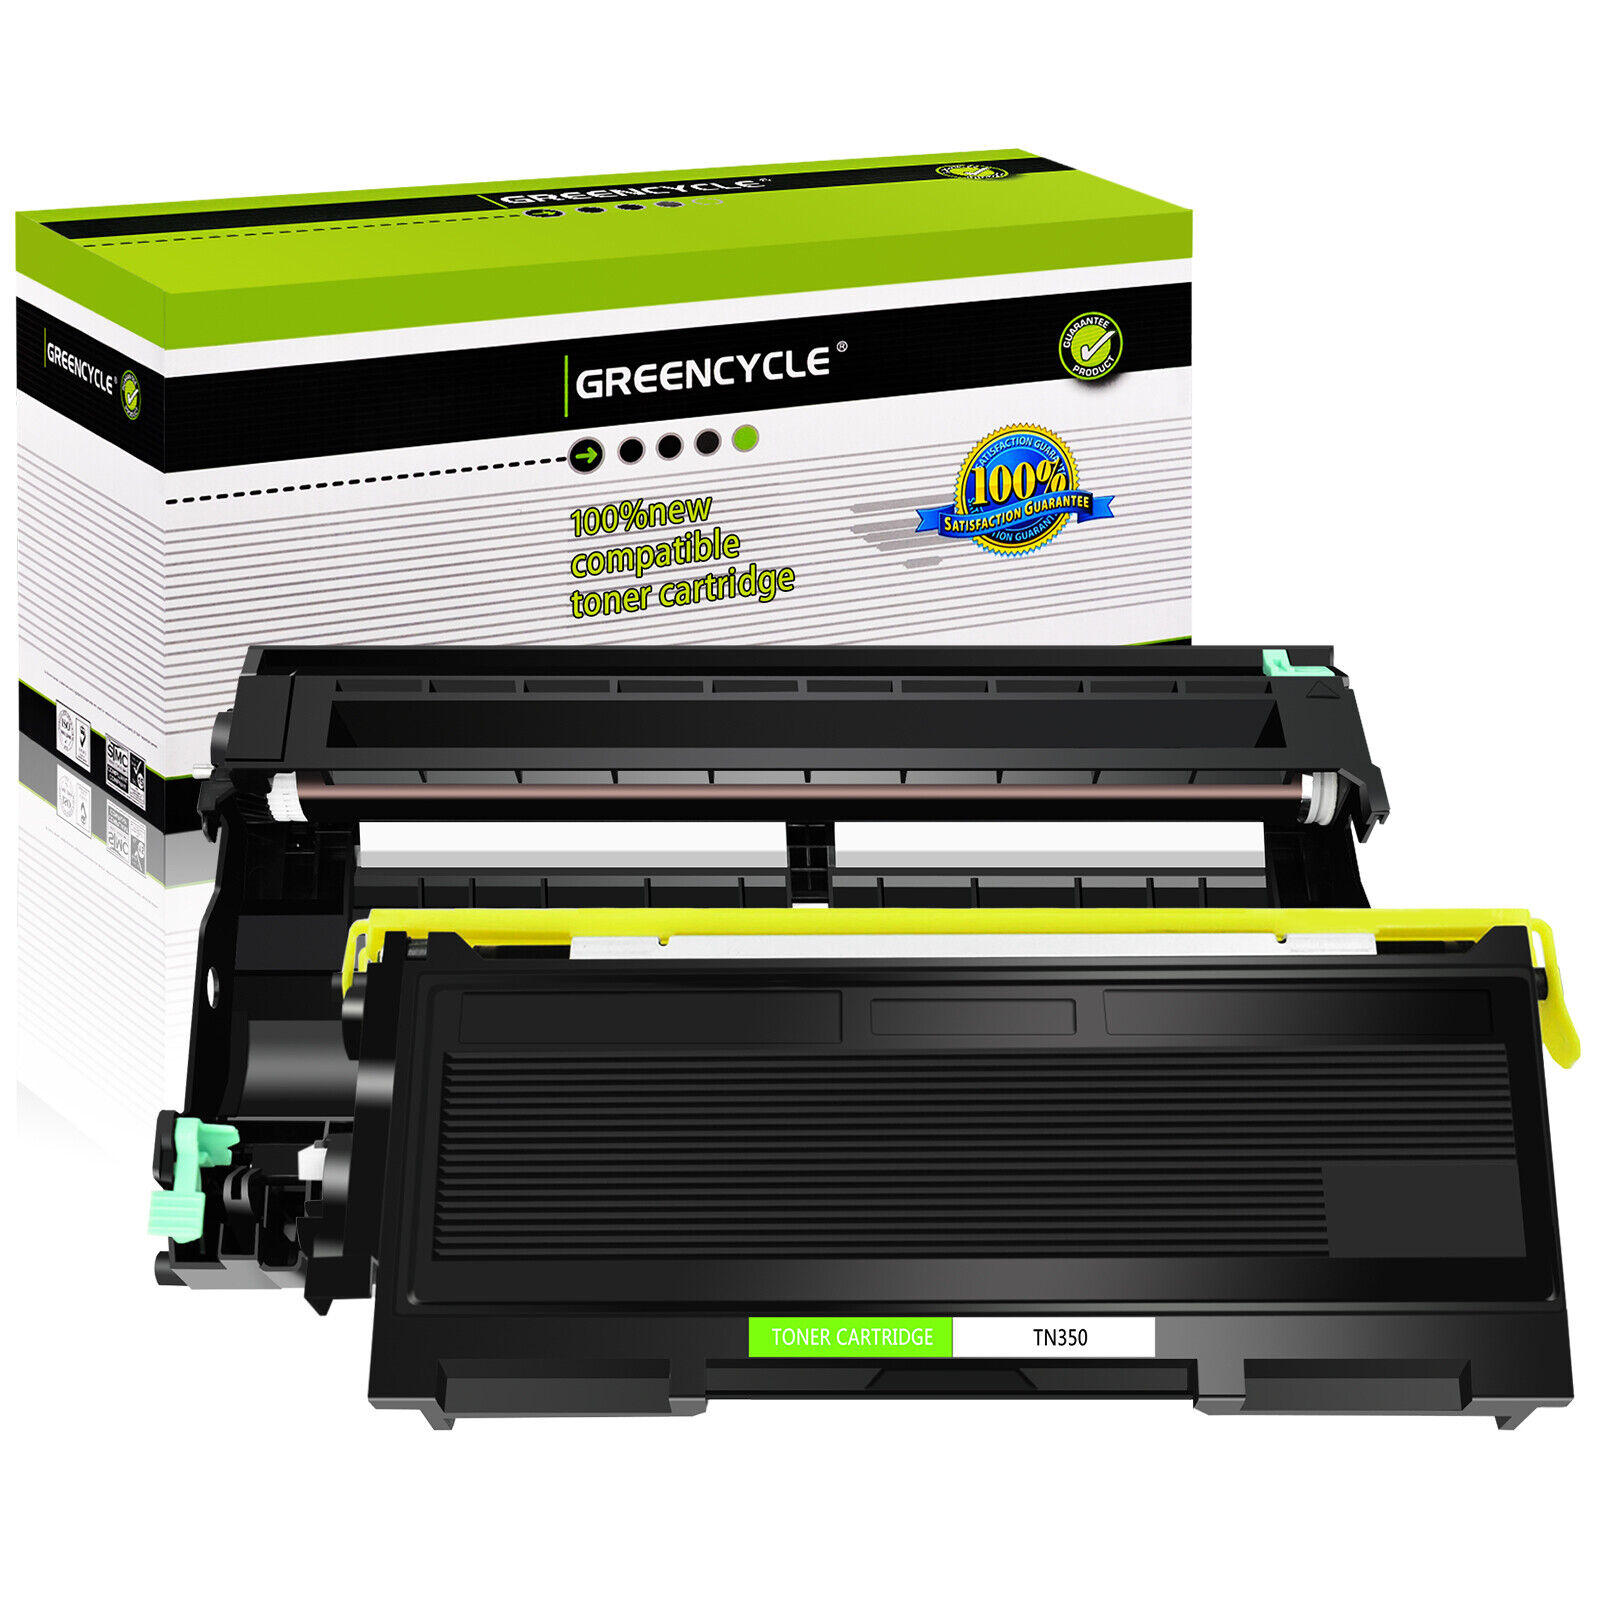 TN350 Toner & DR350 Drum Fit for Brother MFC-7420 7820D 7820N DCP-7020 DCP-7010 